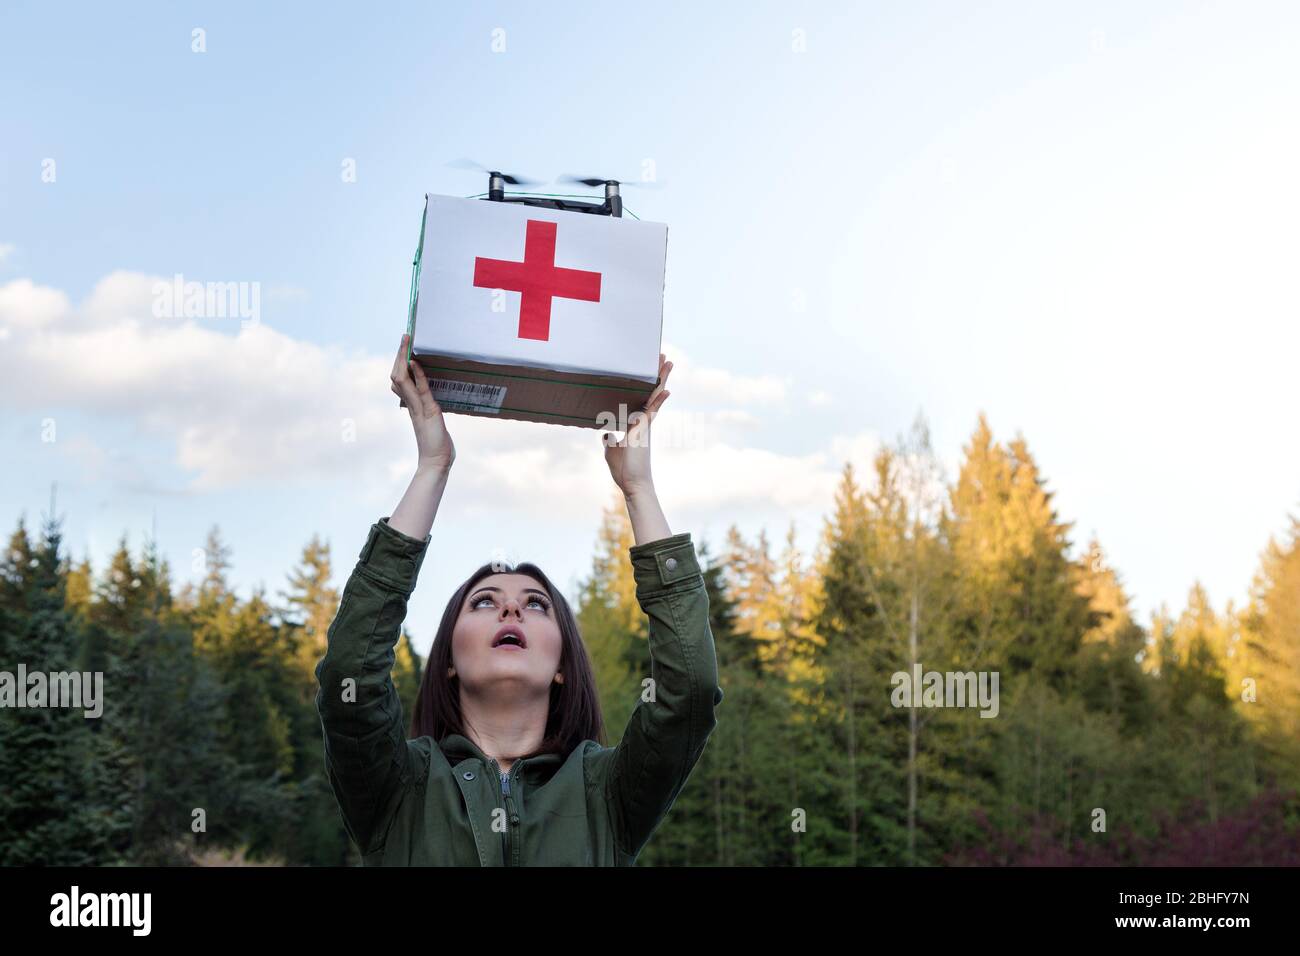 Attractive young brunette woman catching a medical supplies box that is being delivered by an autonomous drone. Stock Photo